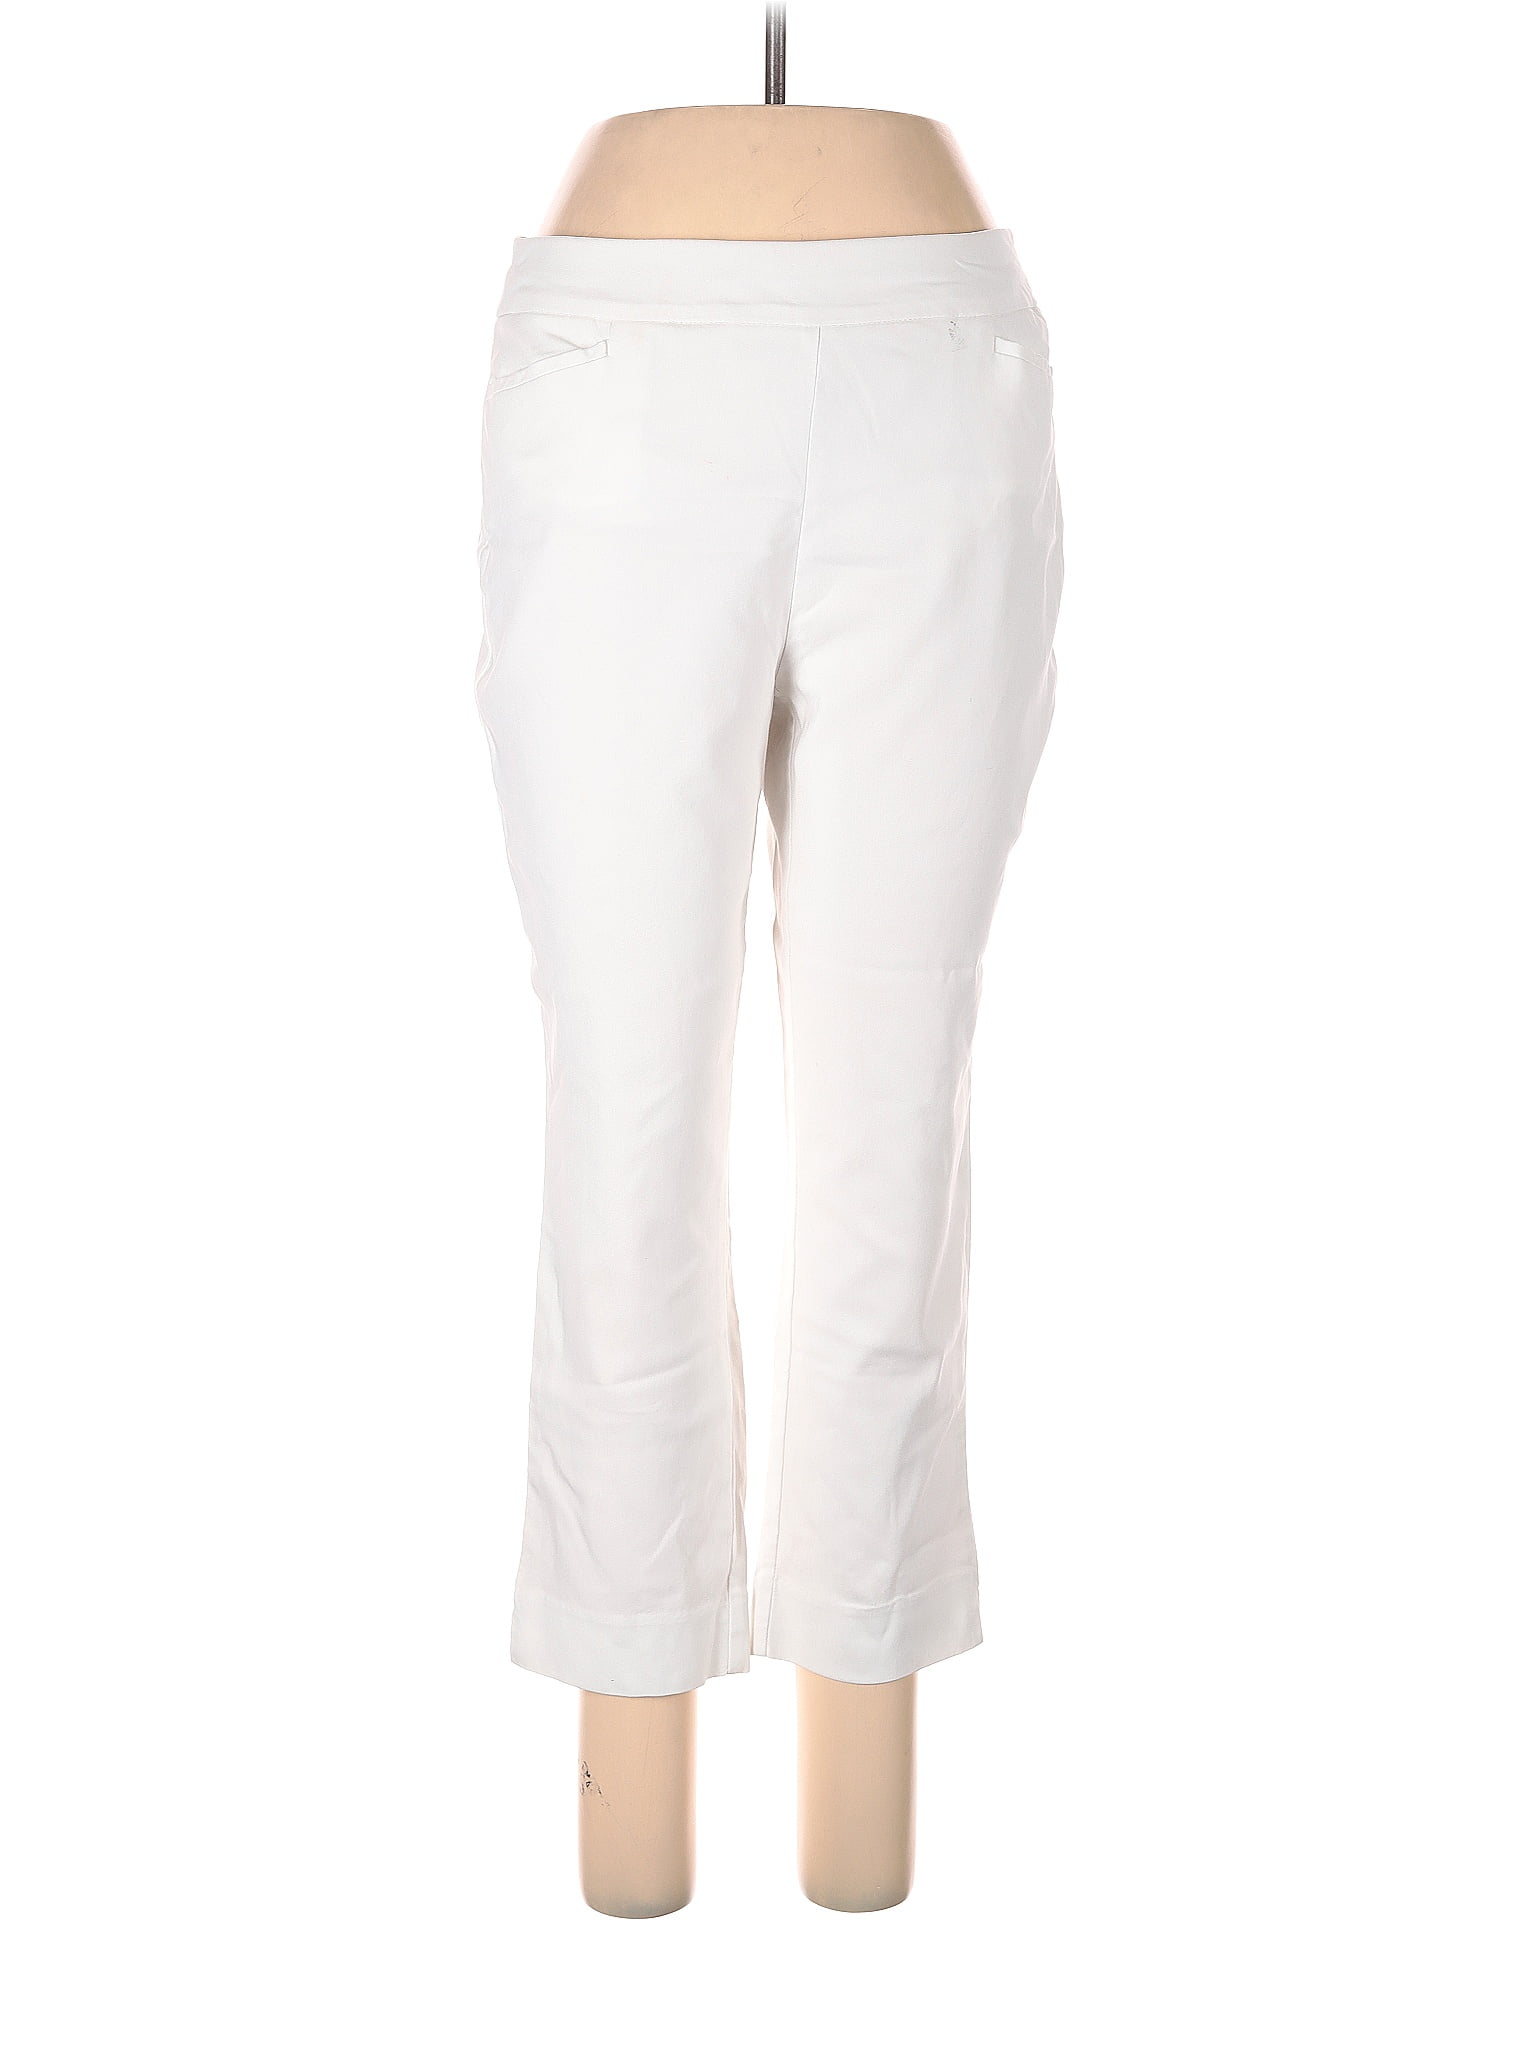 Zenergy by Chico's Solid White Leggings Size Med (1) - 60% off